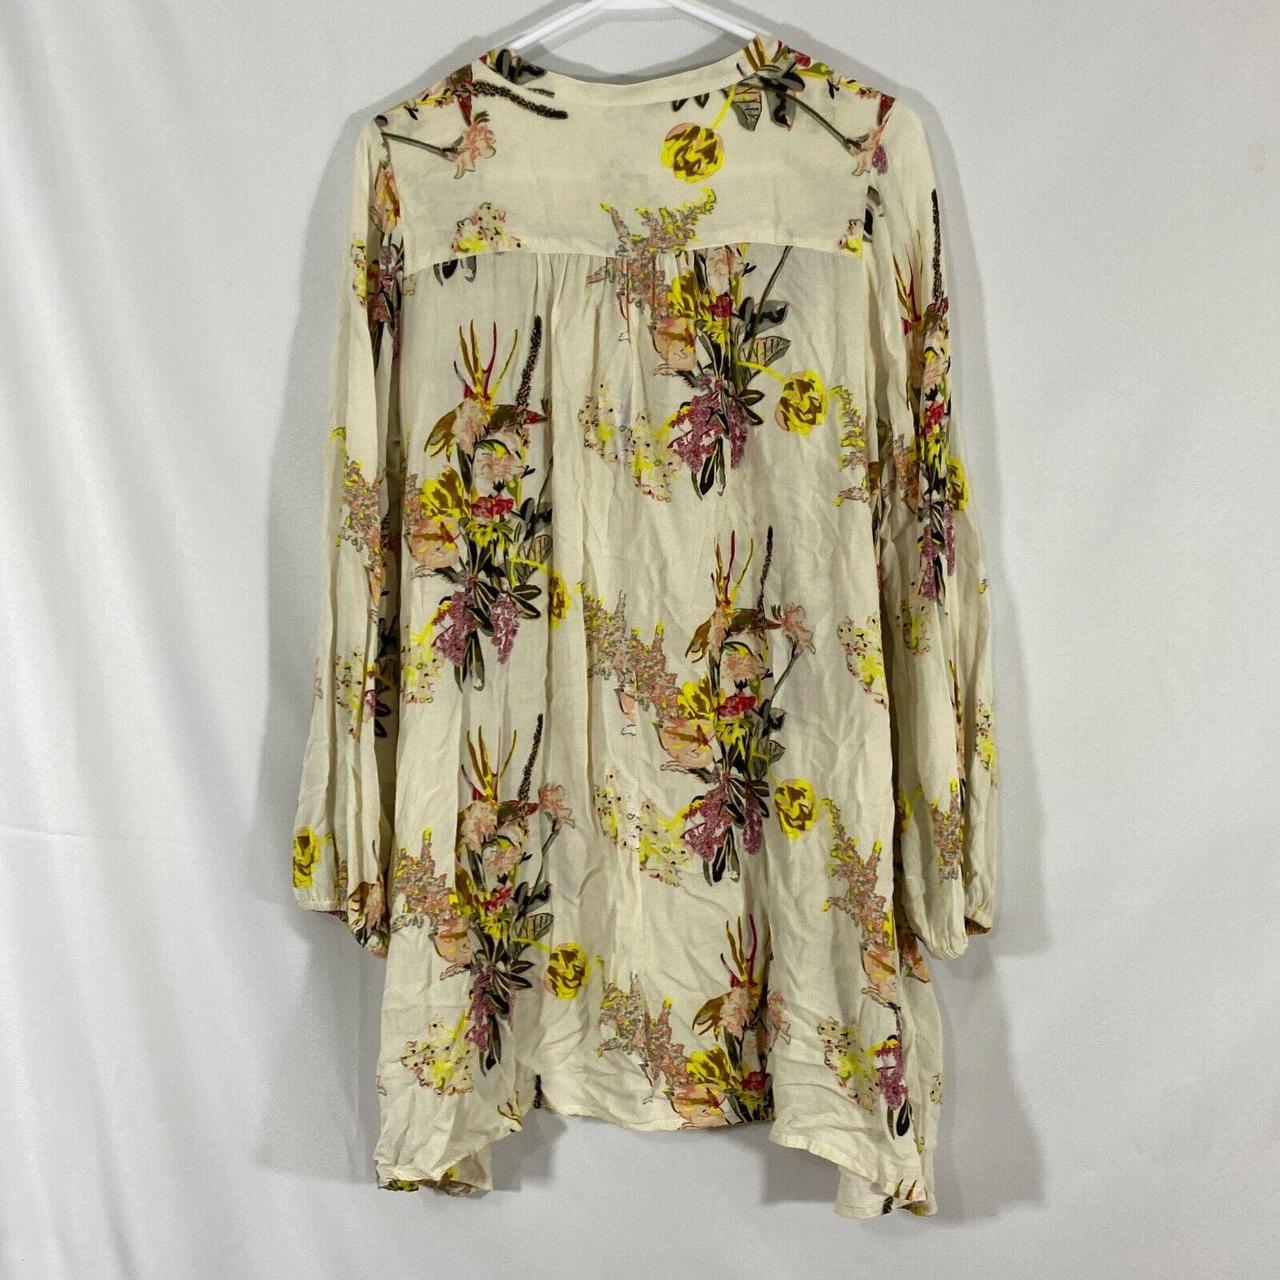 Product Image 2 - World Market Womens White Floral